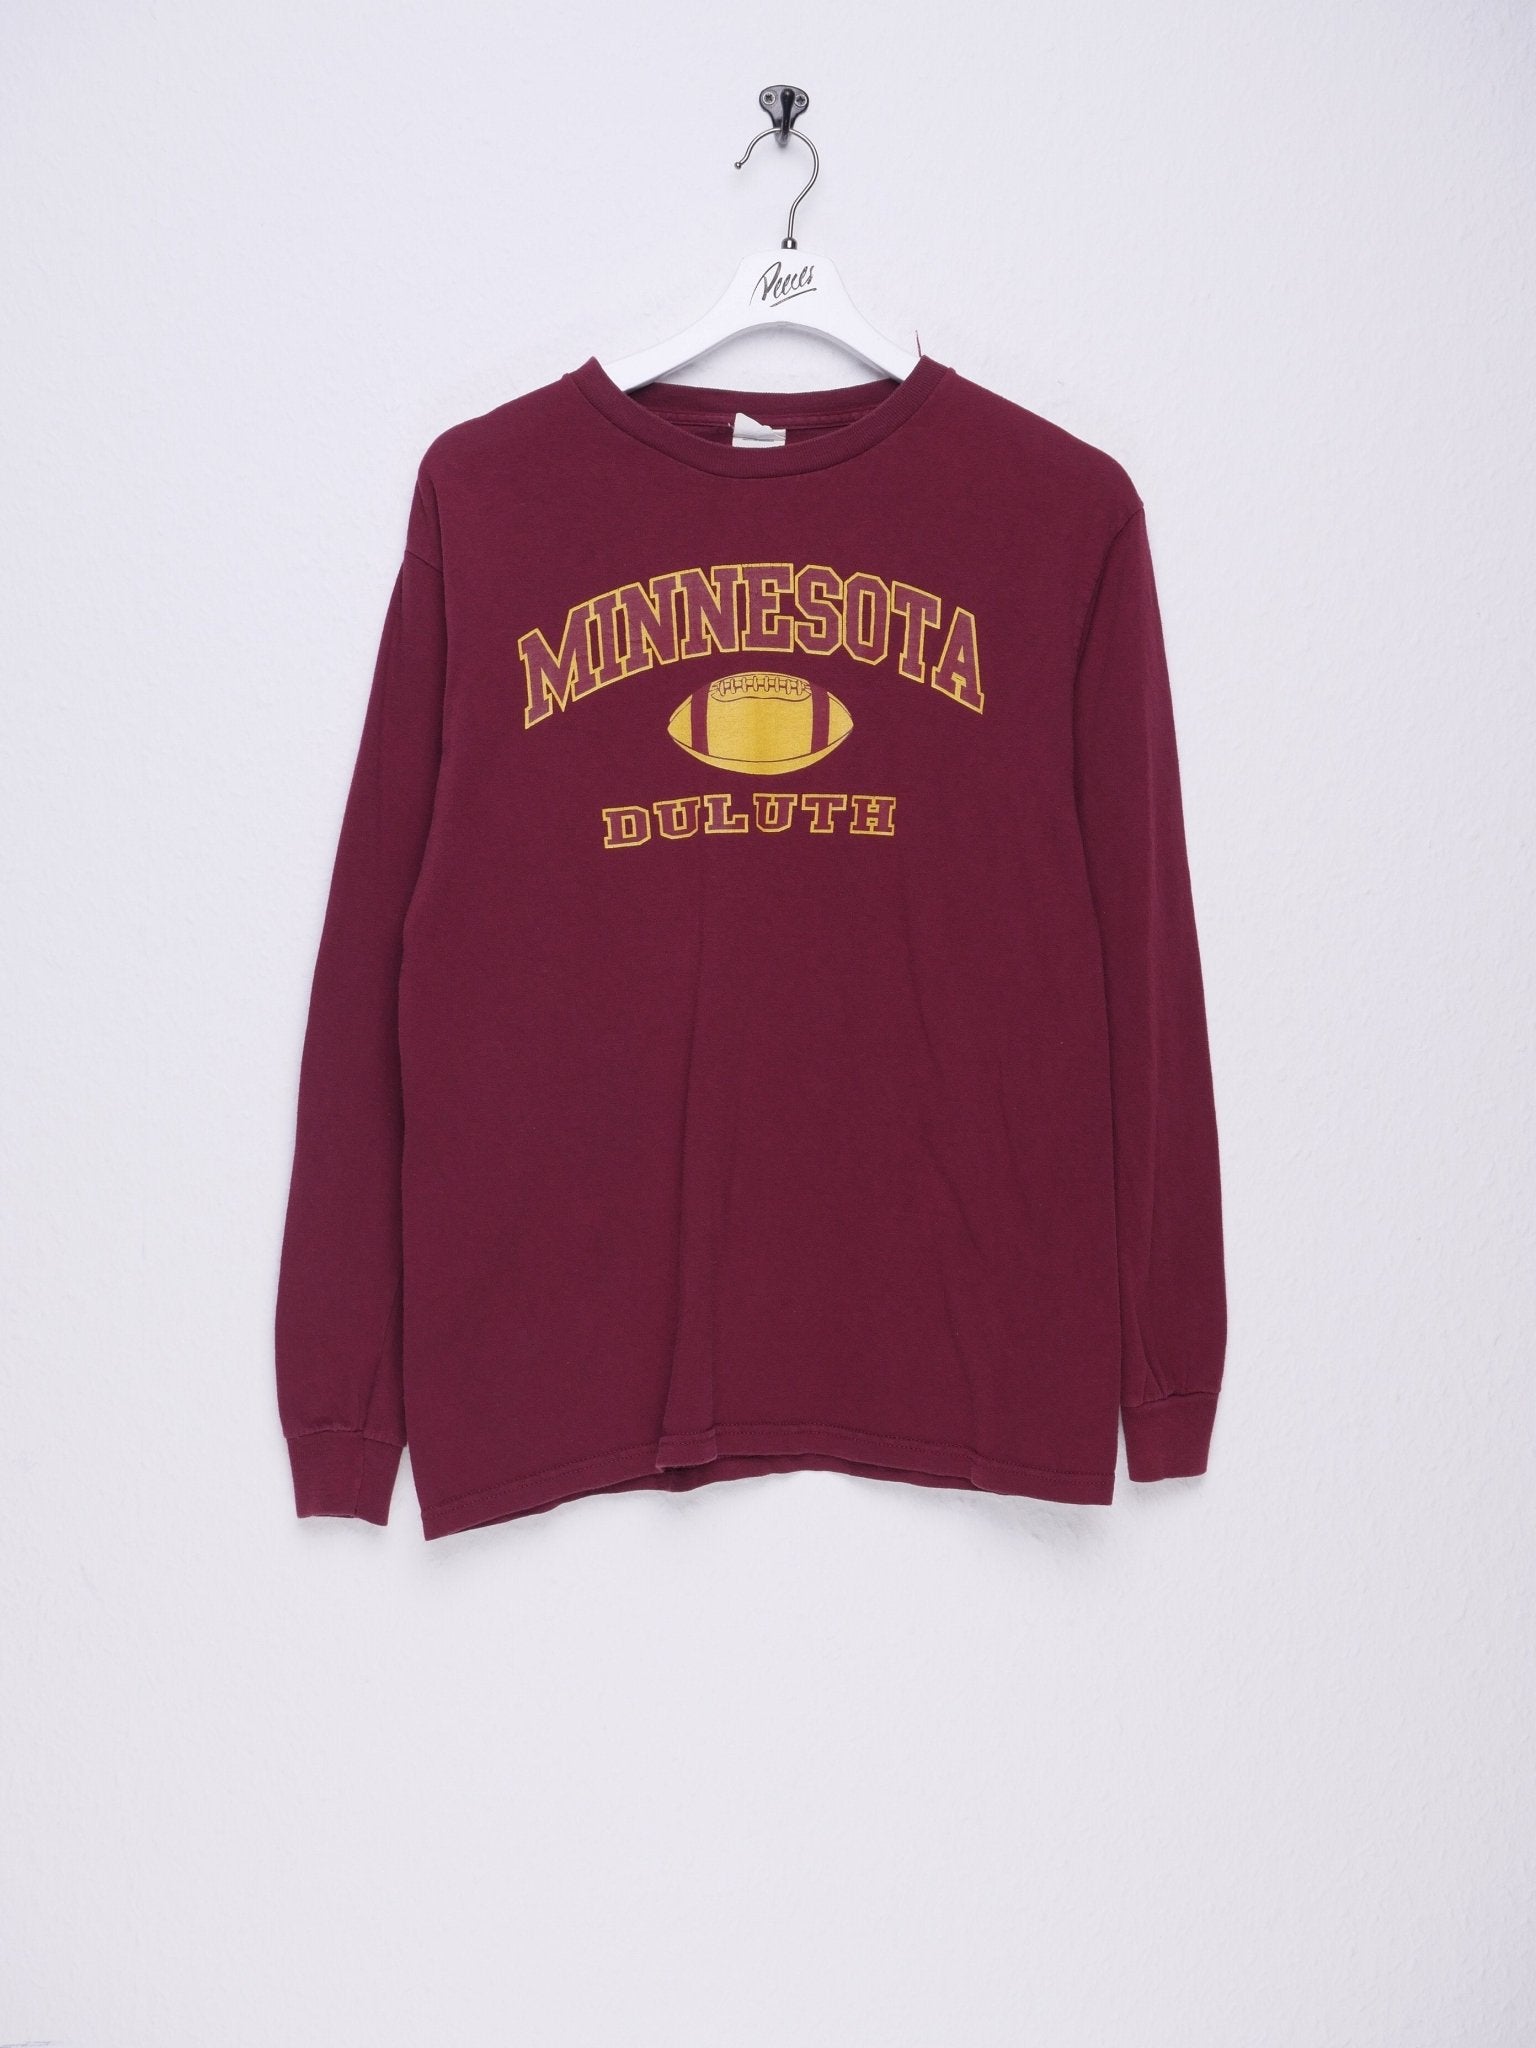 Minnesota Duluth printed Spellout L/S Shirt - Peeces